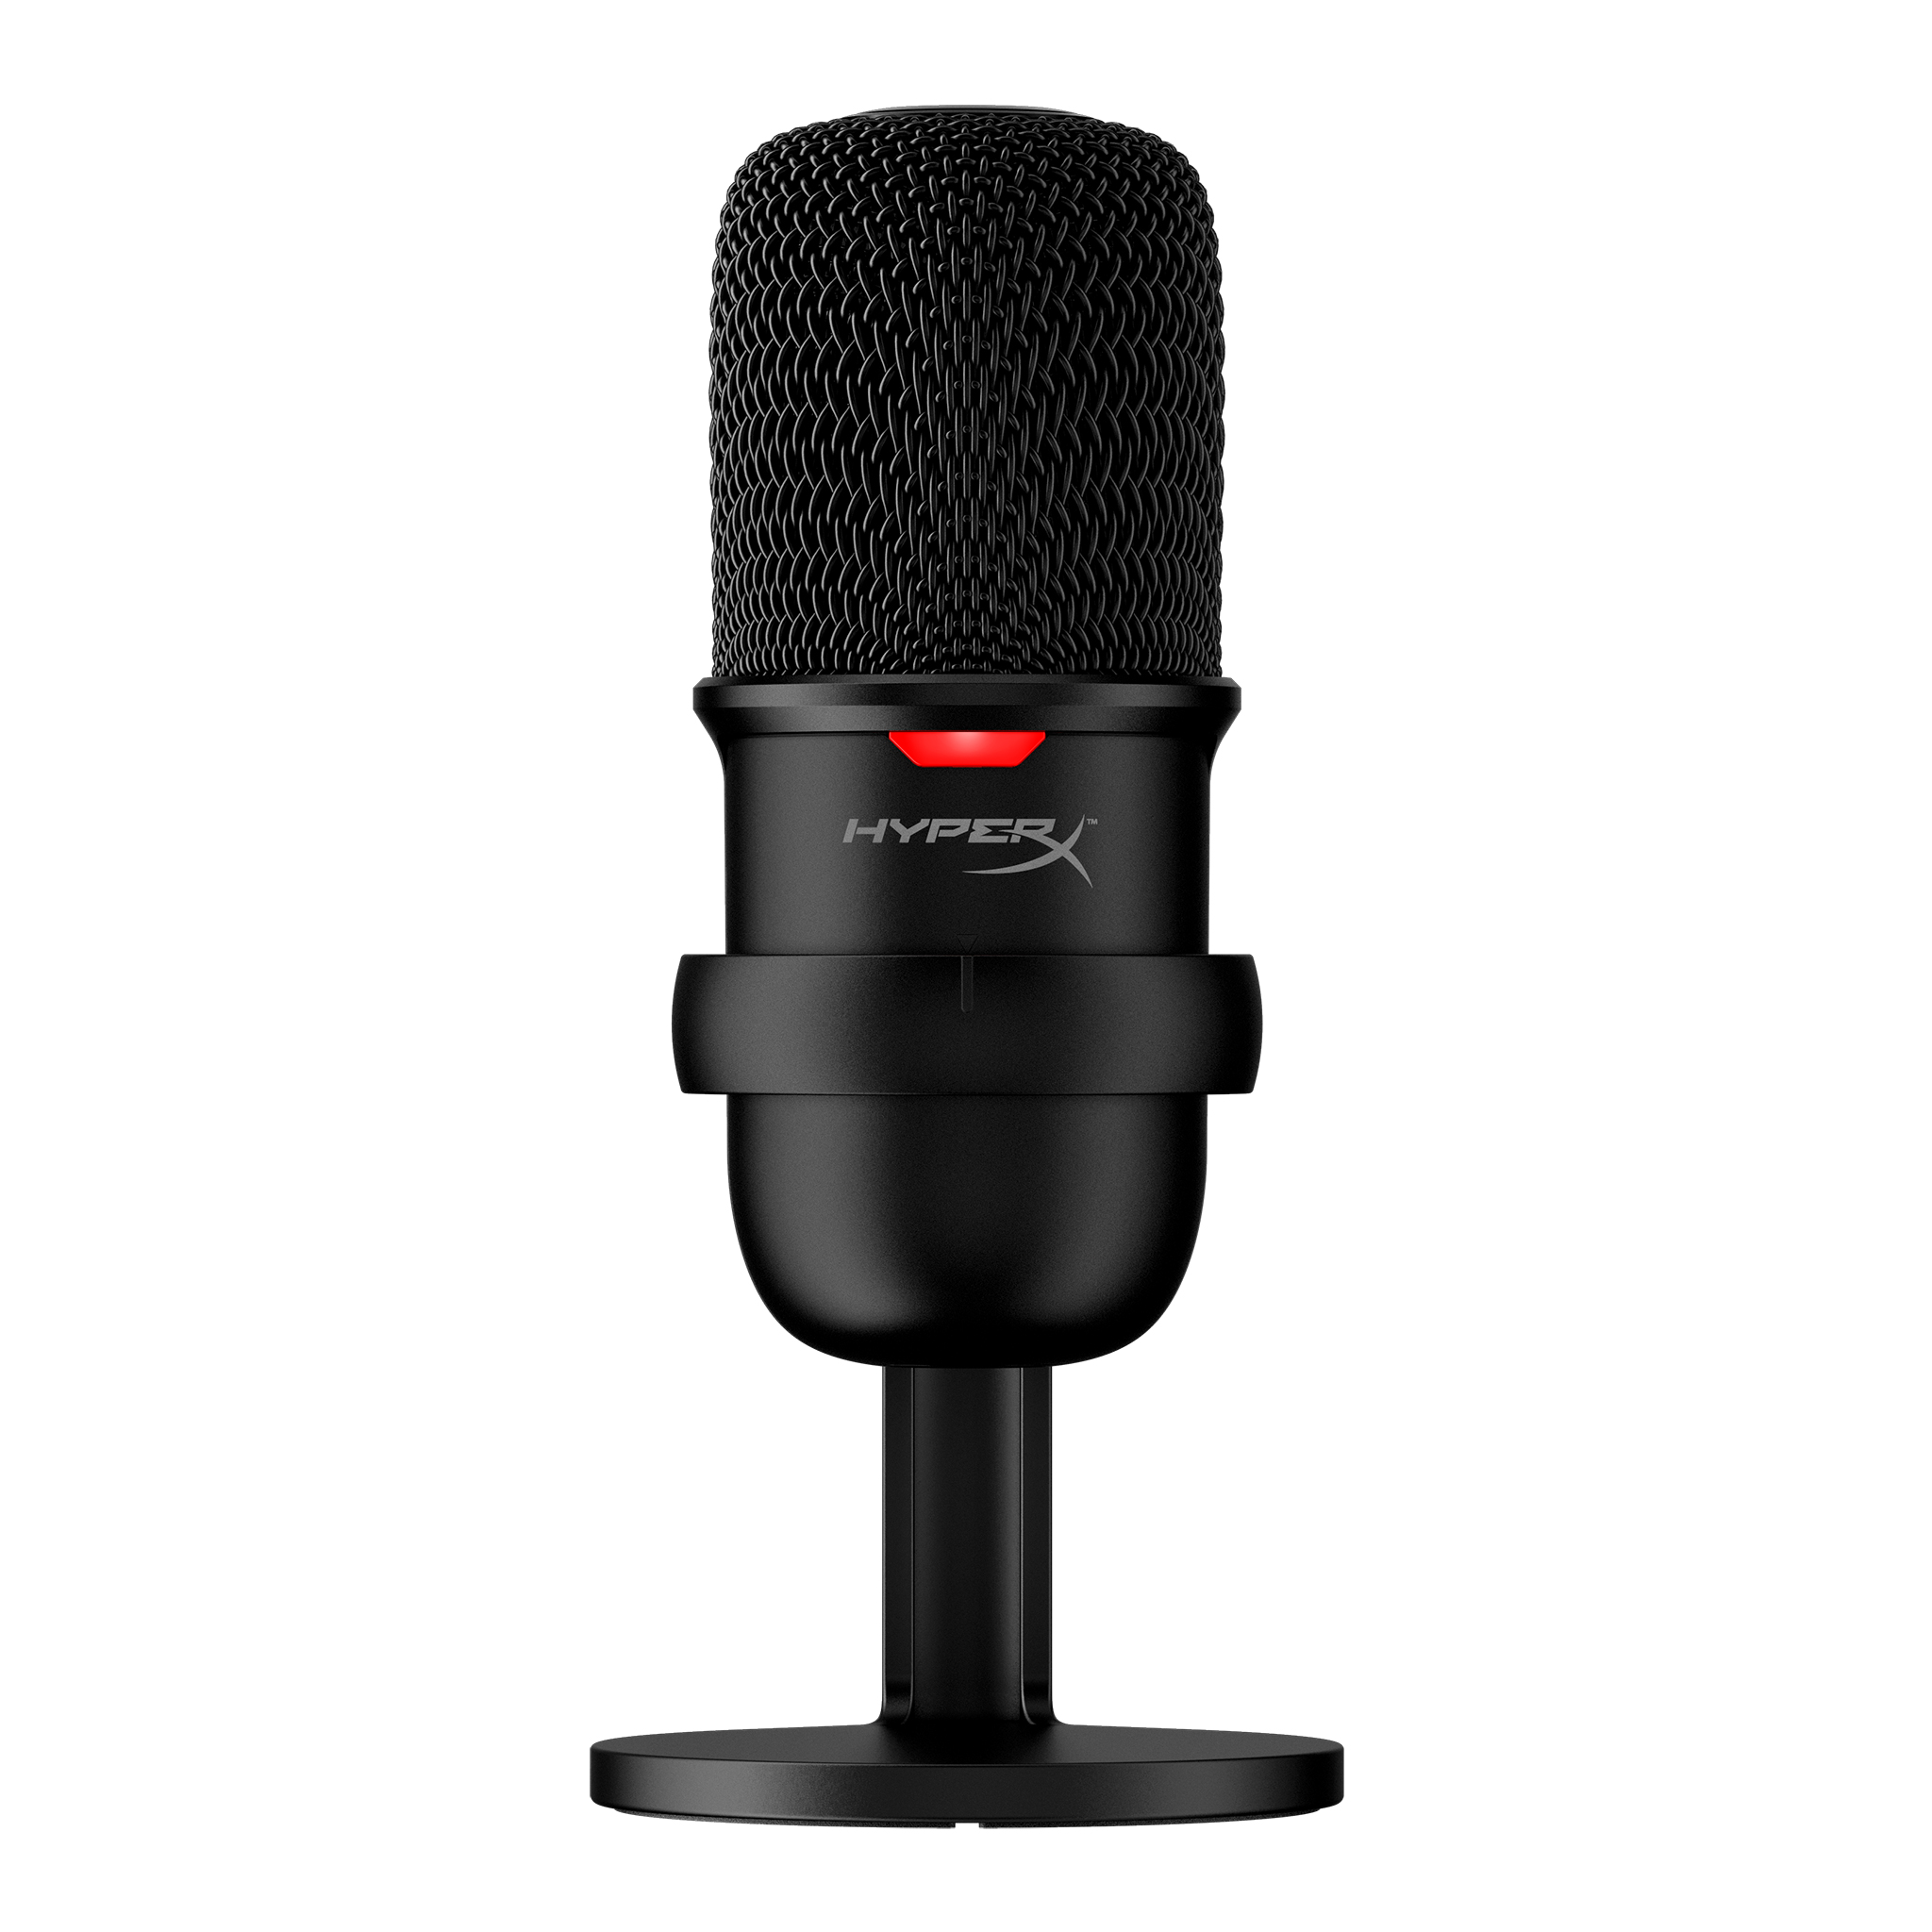 HyperX SoloCast, Microphone for the streaming, Sampling rates: 48 / 44.1 /32 / 16 / 8 kHz, 20Hz-20kHz, Tap-to-Mute sensor with LED indicator, Flexible, Adjustable stand, Cardioid polar pattern, Boom arm and mic stand, Cable length: 2m, Black, USB